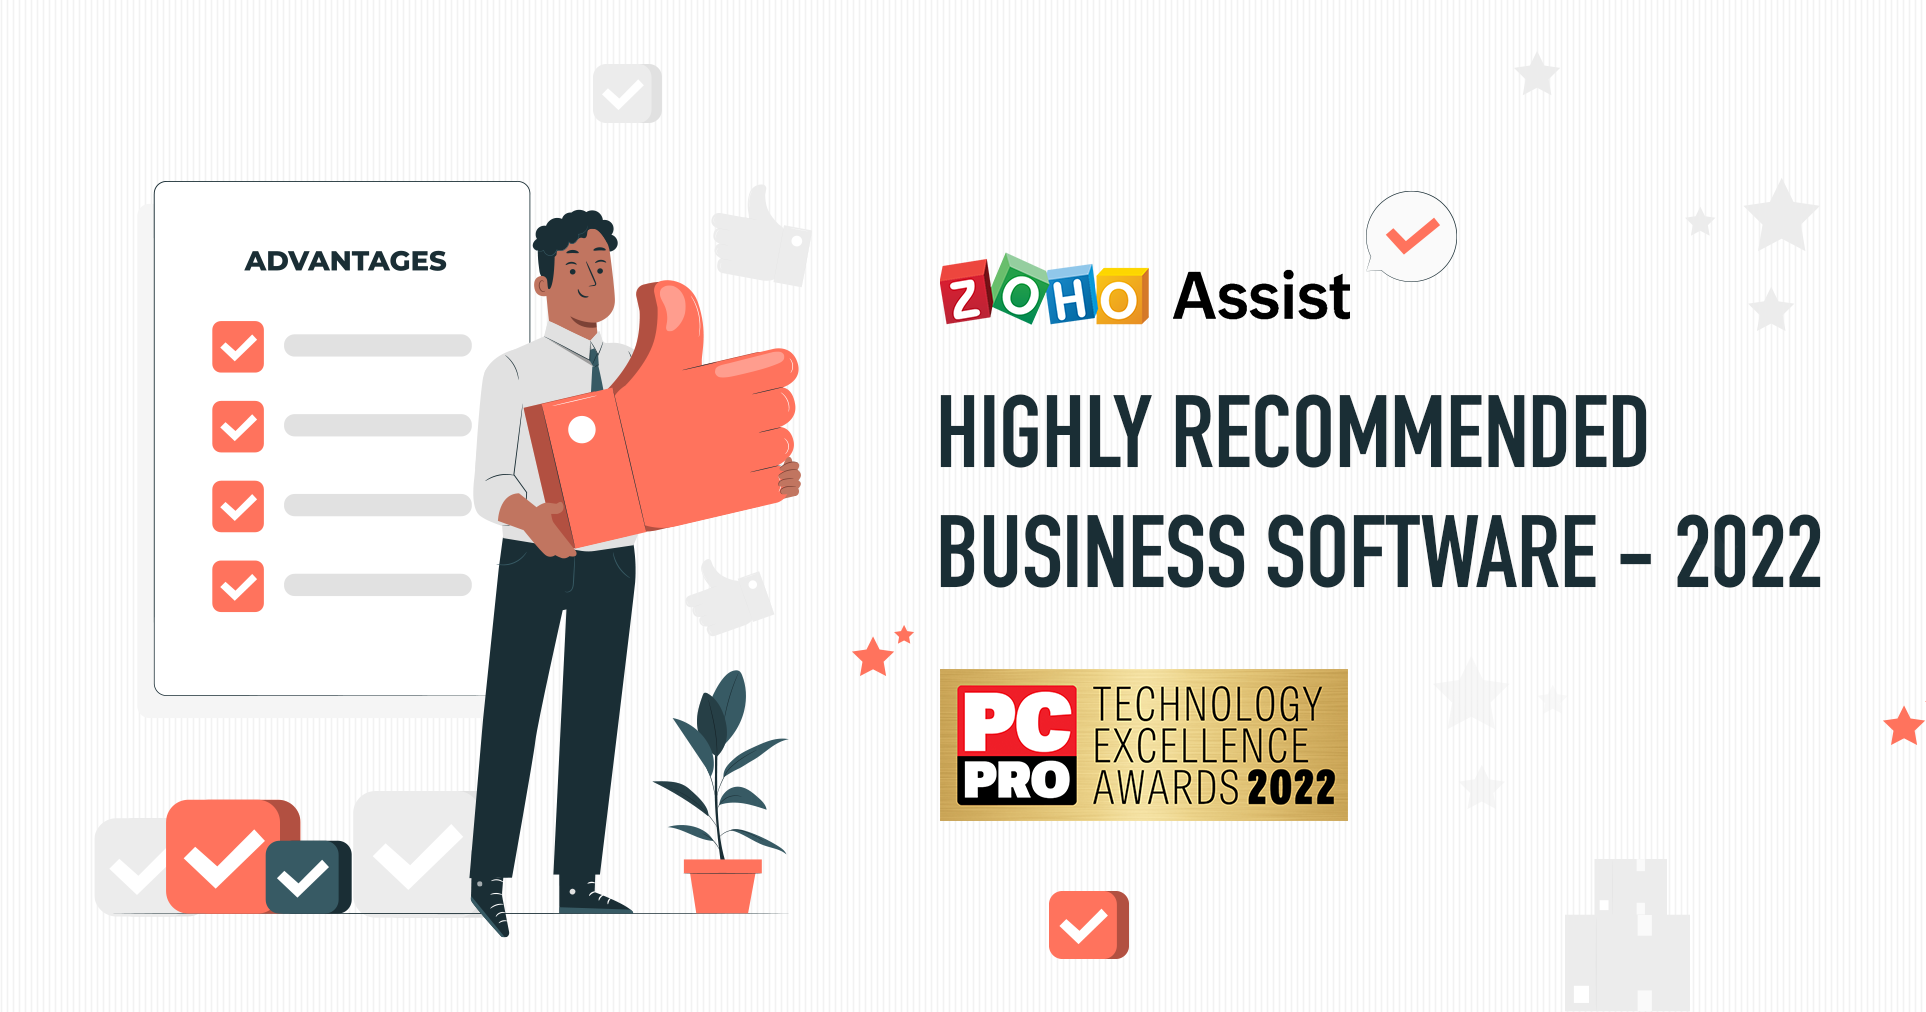 Discover why Zoho Assist is highly recommended business software